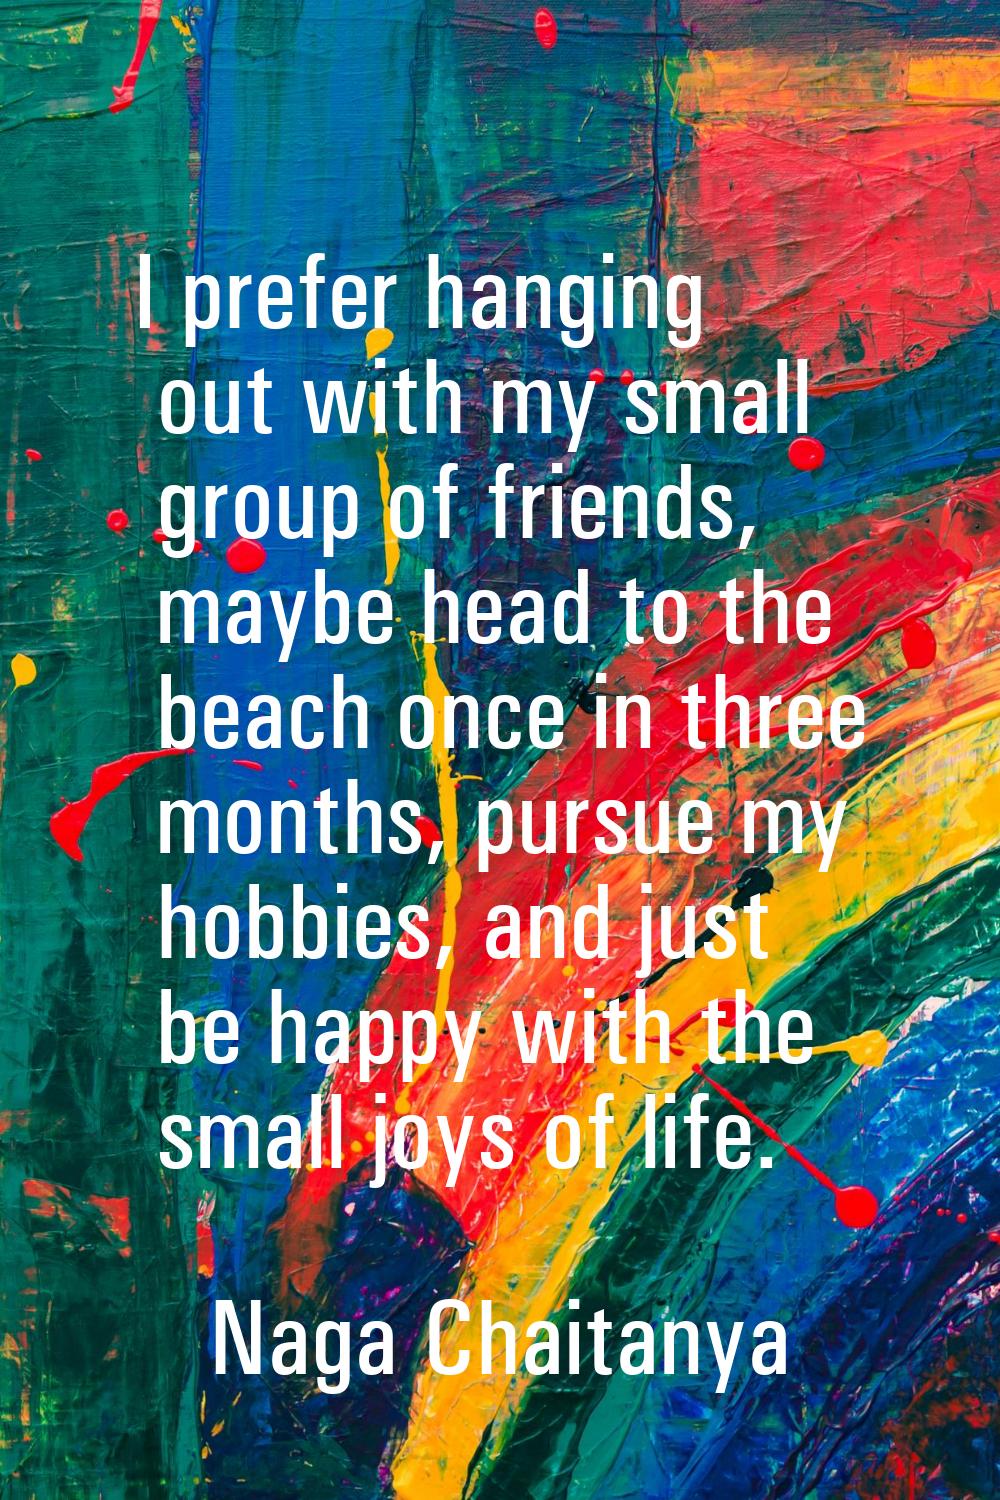 I prefer hanging out with my small group of friends, maybe head to the beach once in three months, 